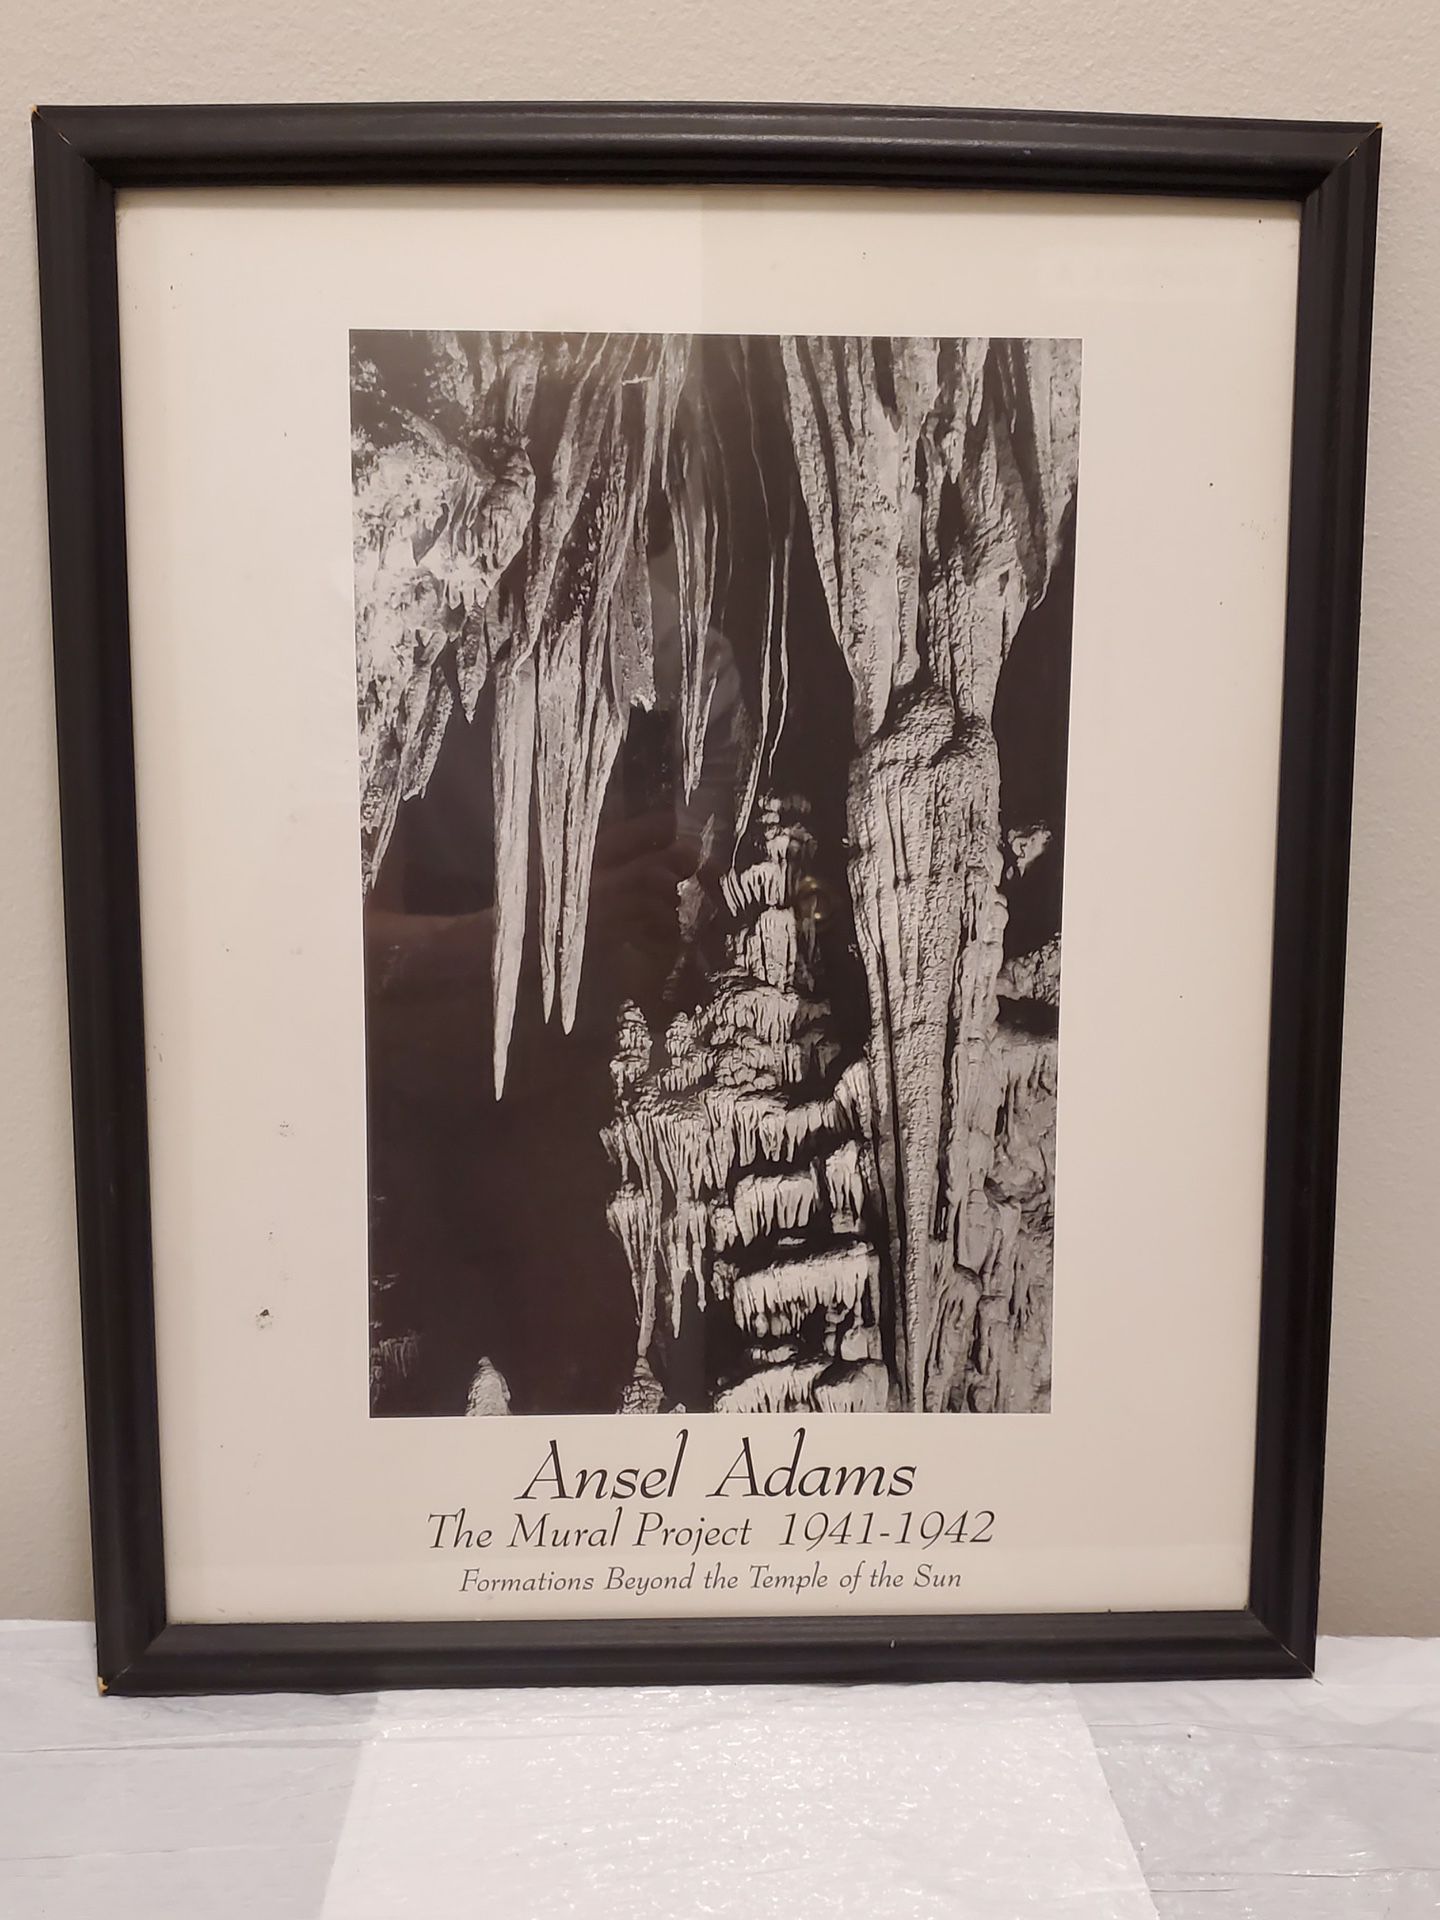 WALL ART - Ansel Adams “The Mural Project" (22.25” H x 17.75” W) - firm price.